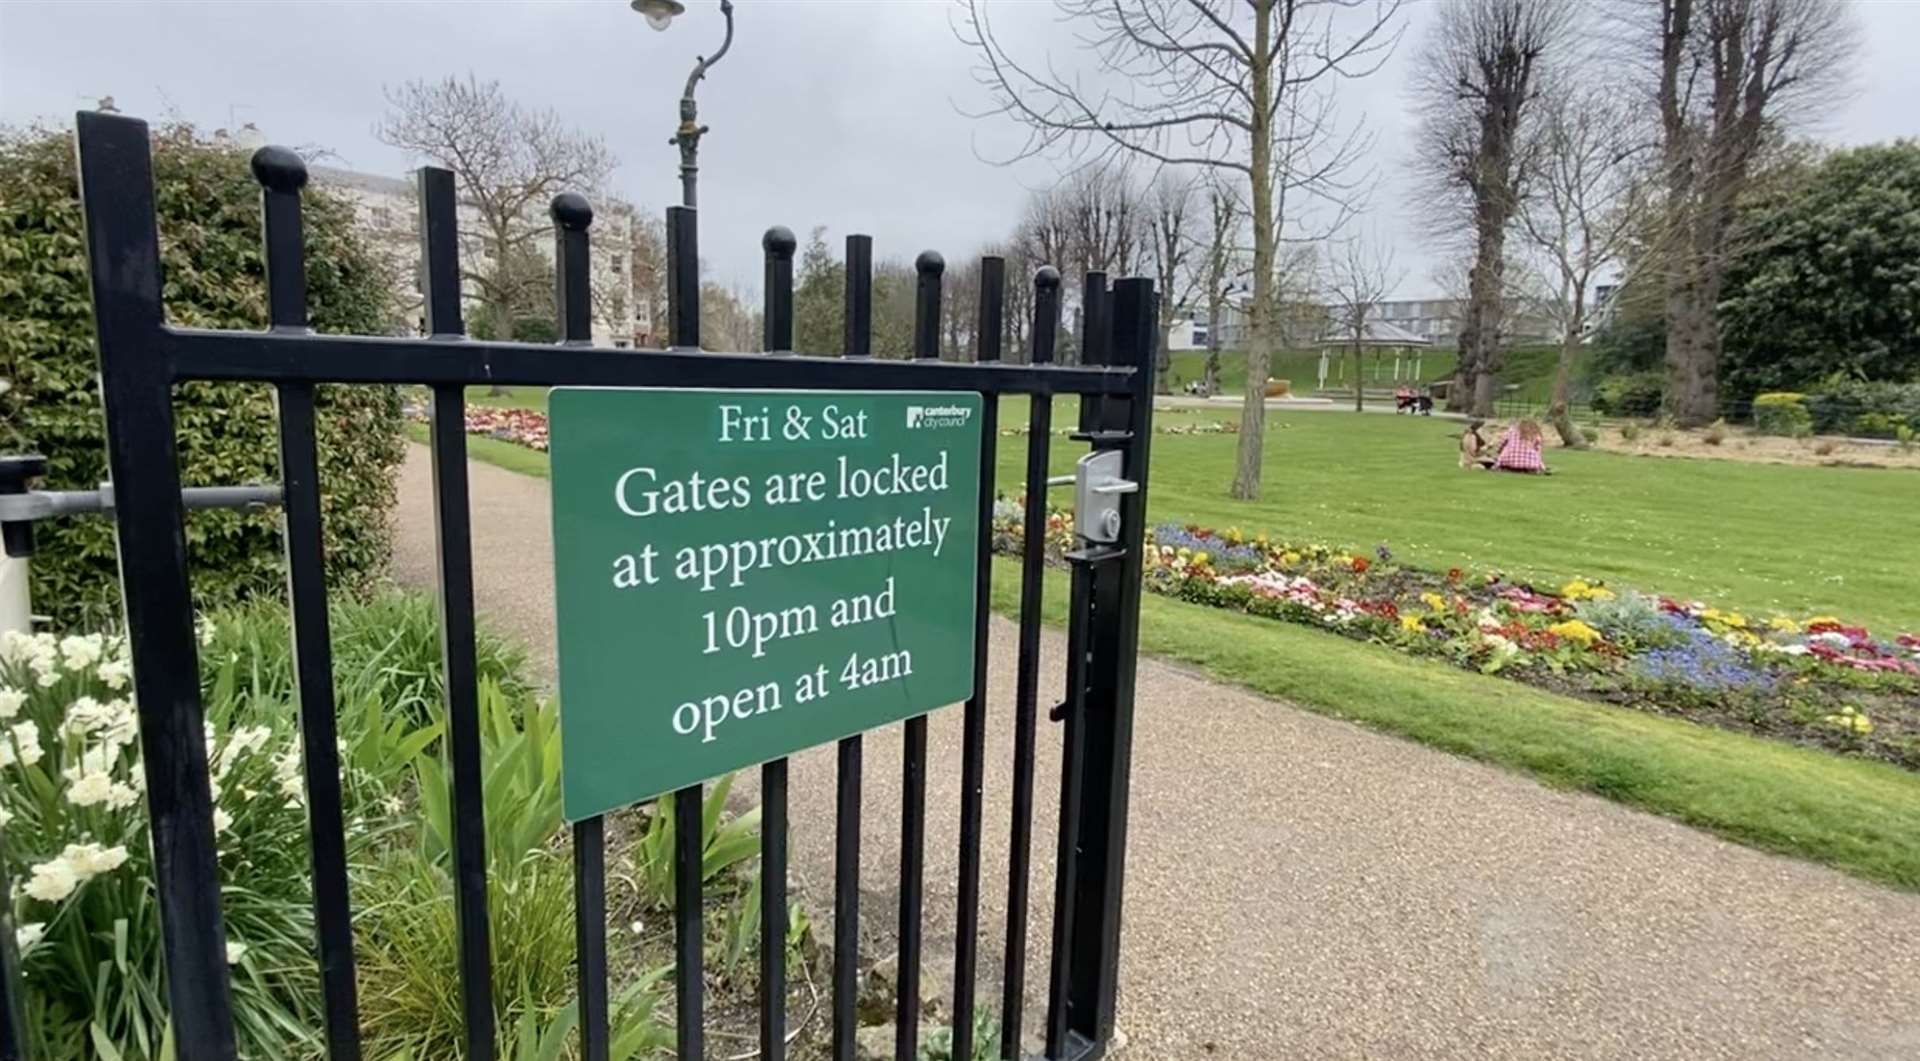 There are plans for gates into the Canterbury park to be locked on weekend nights on a permanent basis